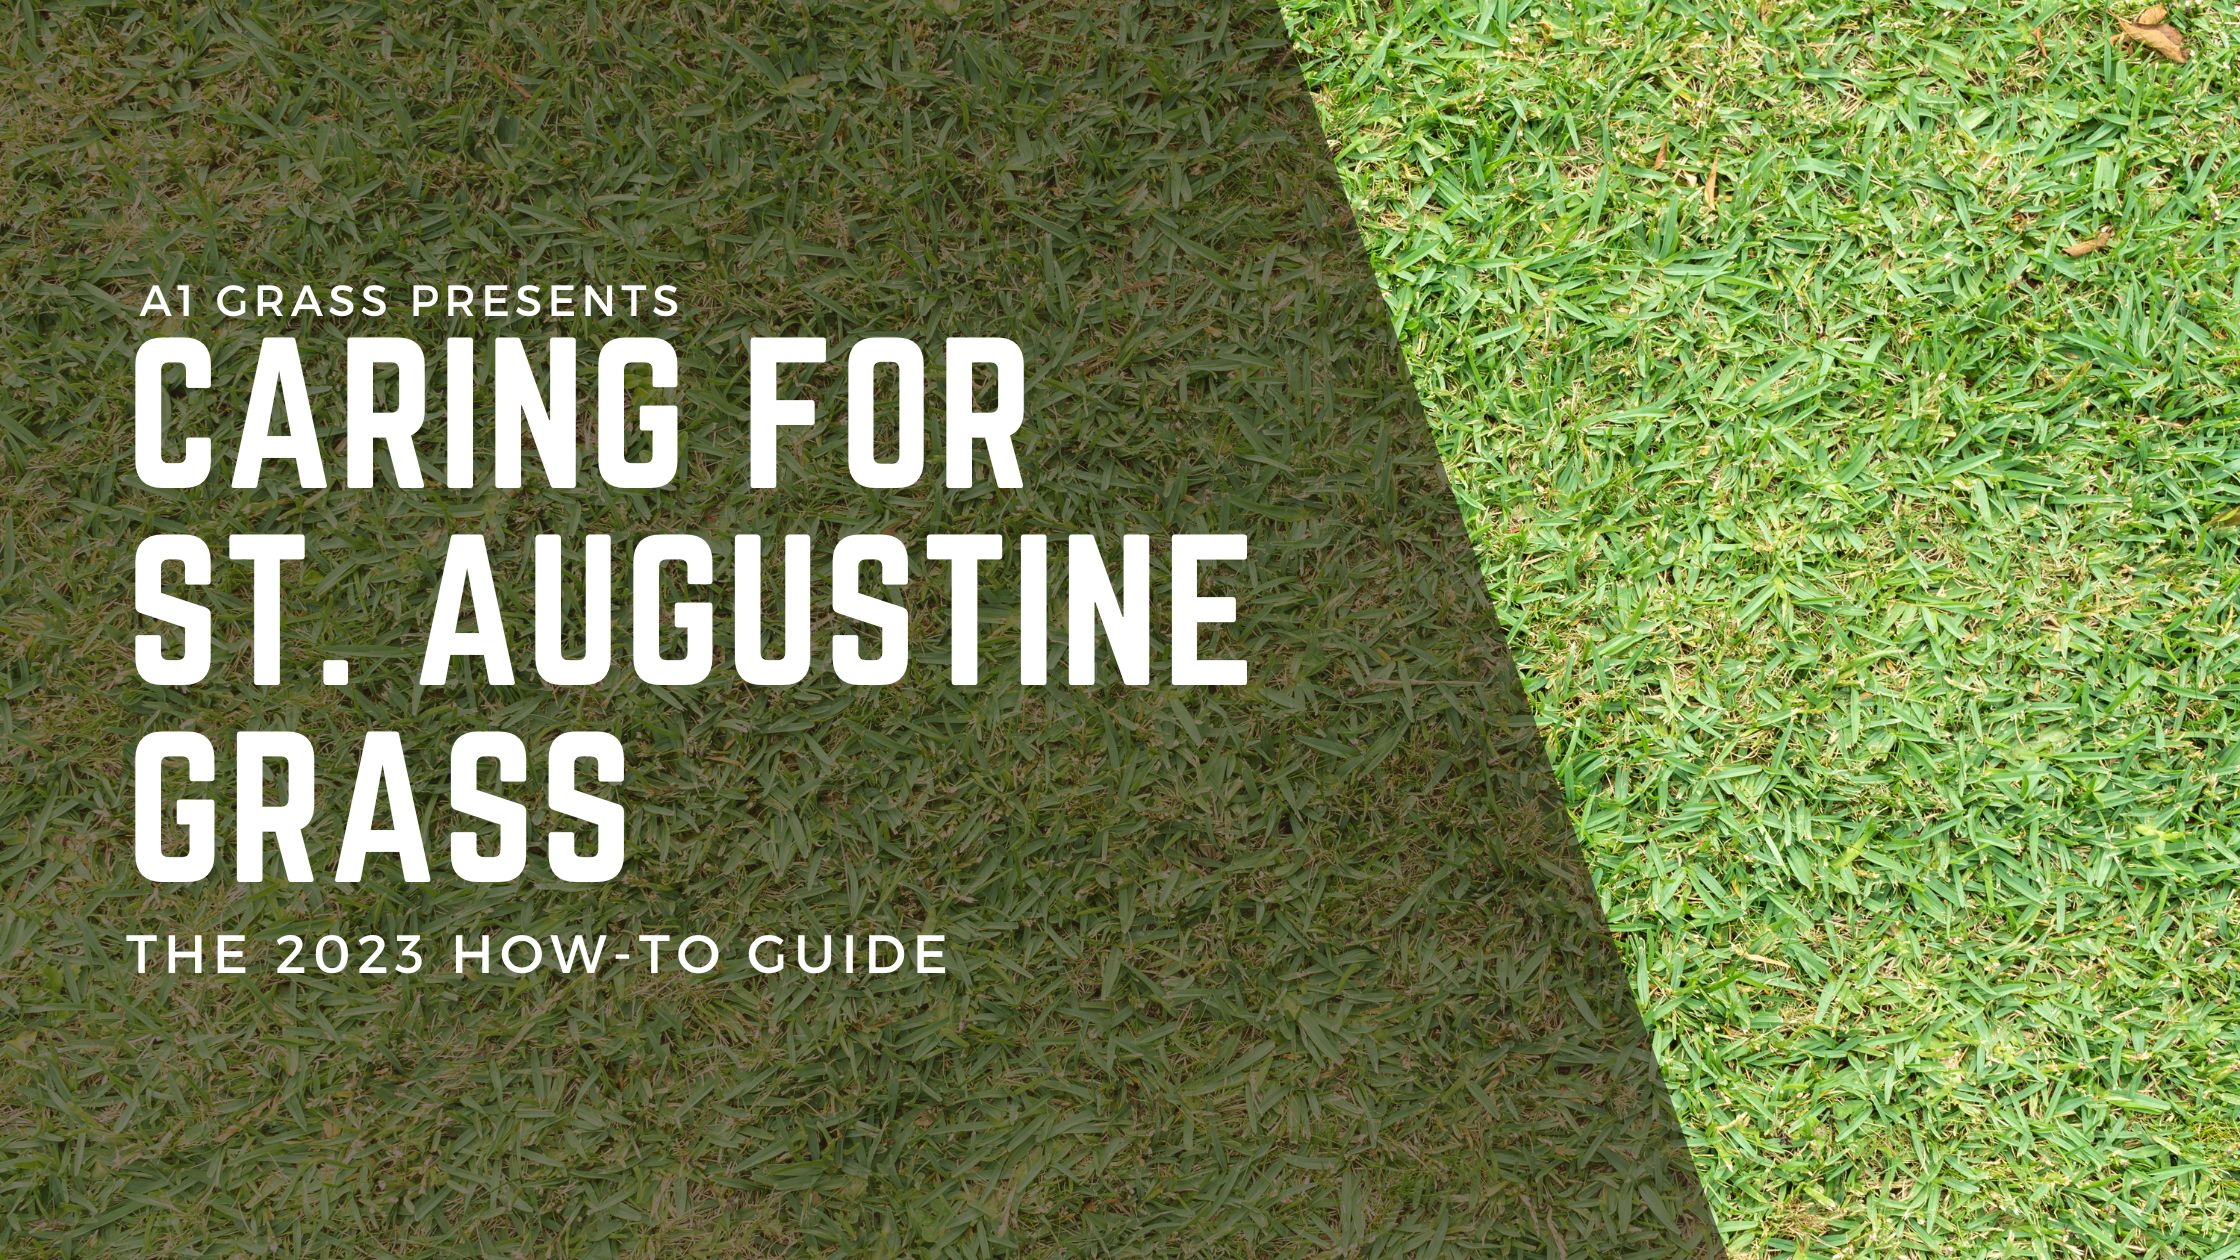 Caring for St. Augustine Grass